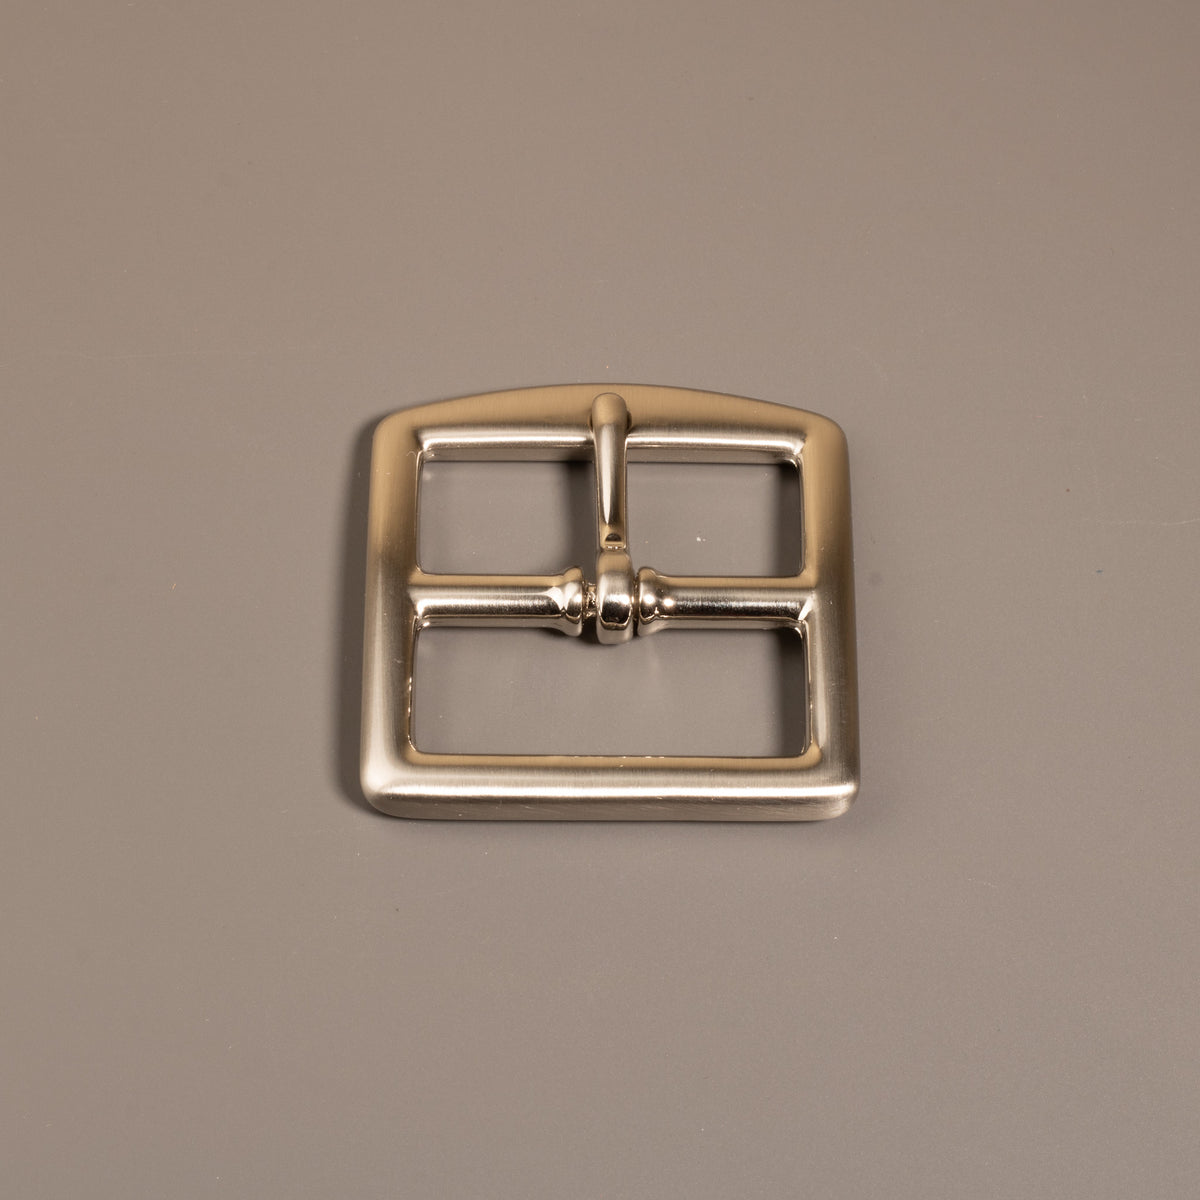 POLISHED SOLID BRASS BUCKLE - 4 CM